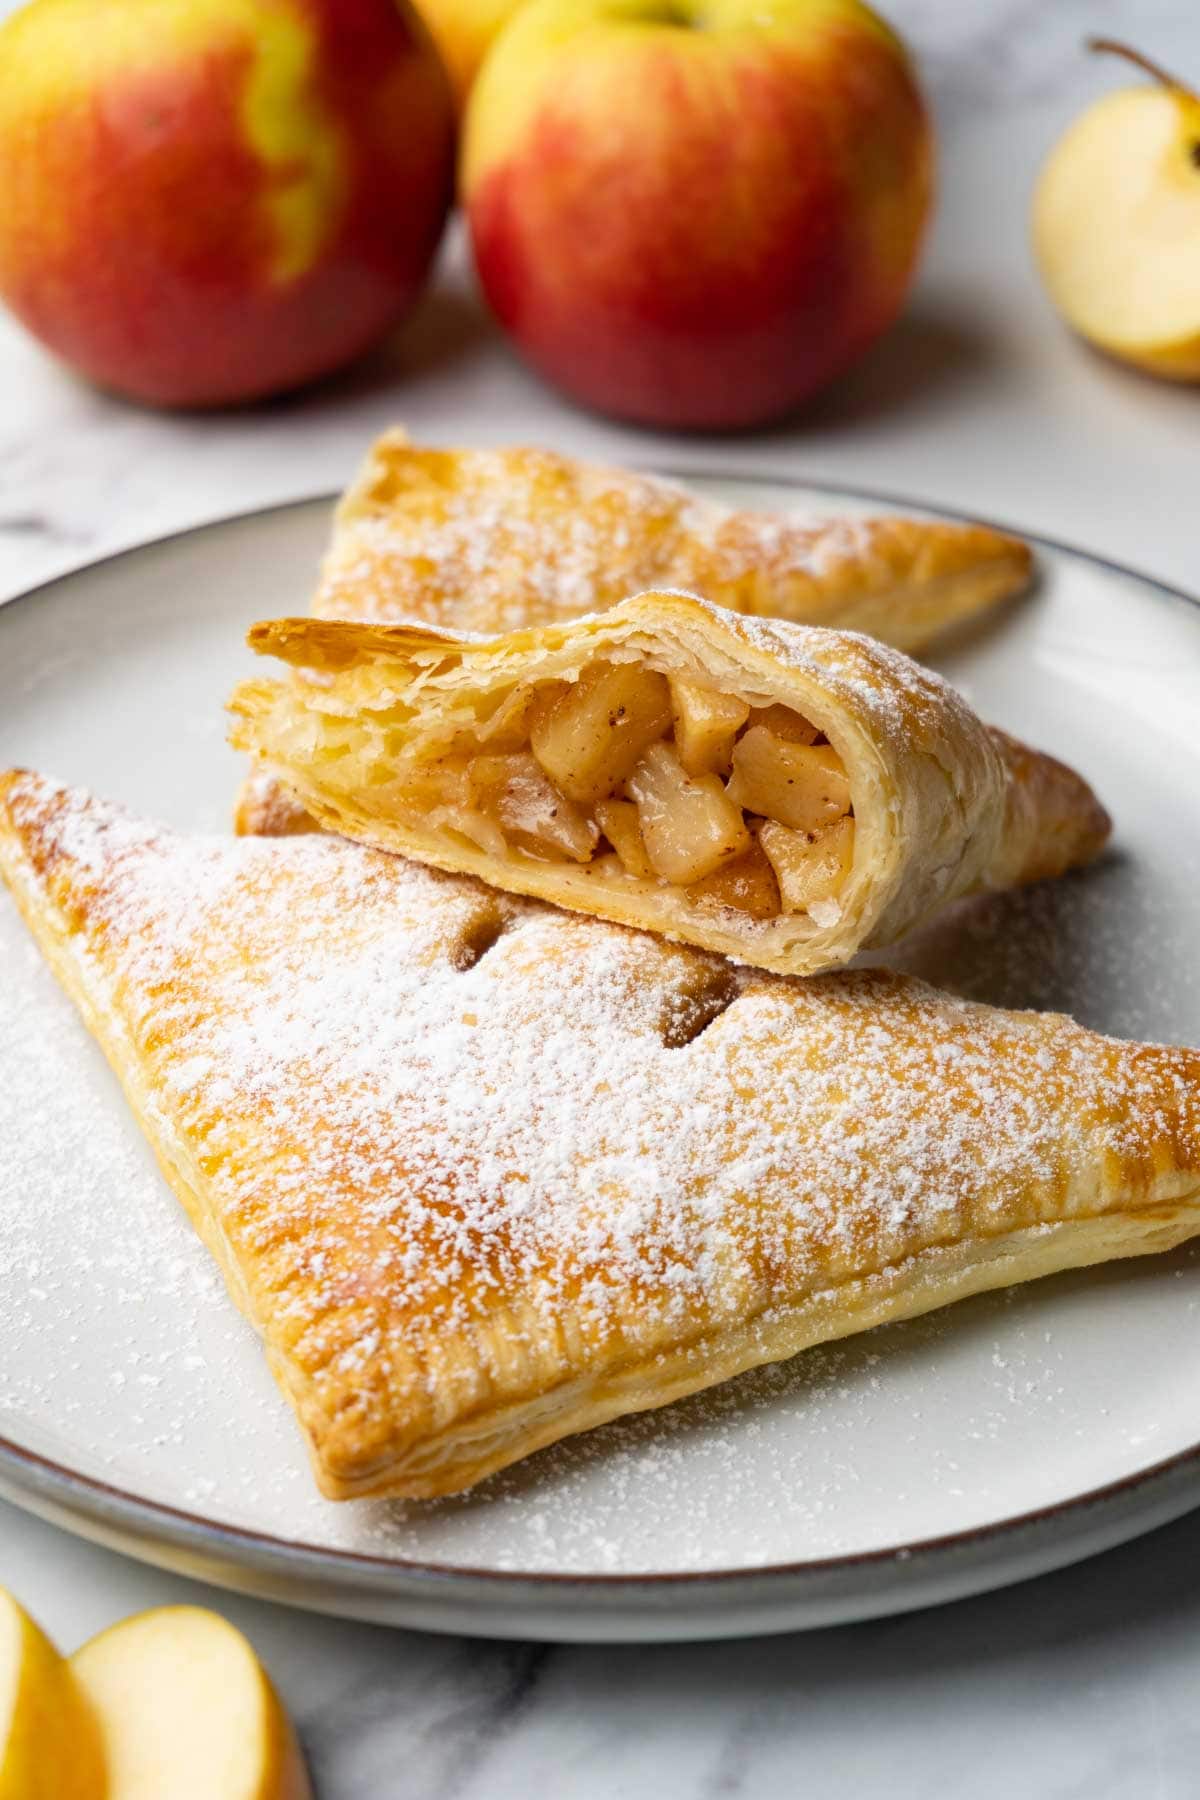 Apple turnovers dusted in powdered sugar on a plate. One turnover is cut in half. Fresh apples are lying around.